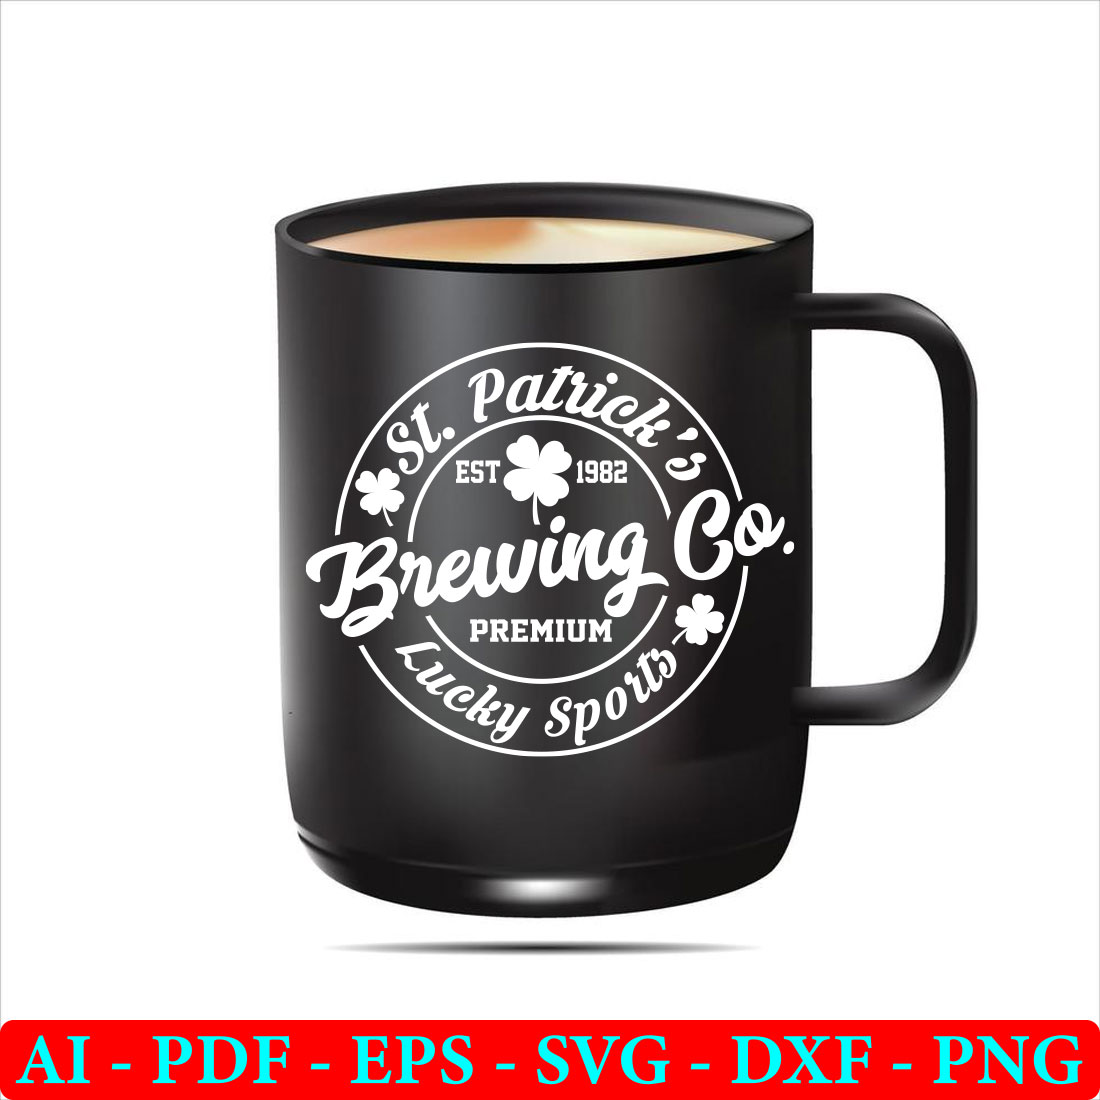 Black coffee mug with the st patrick's brewing logo on it.